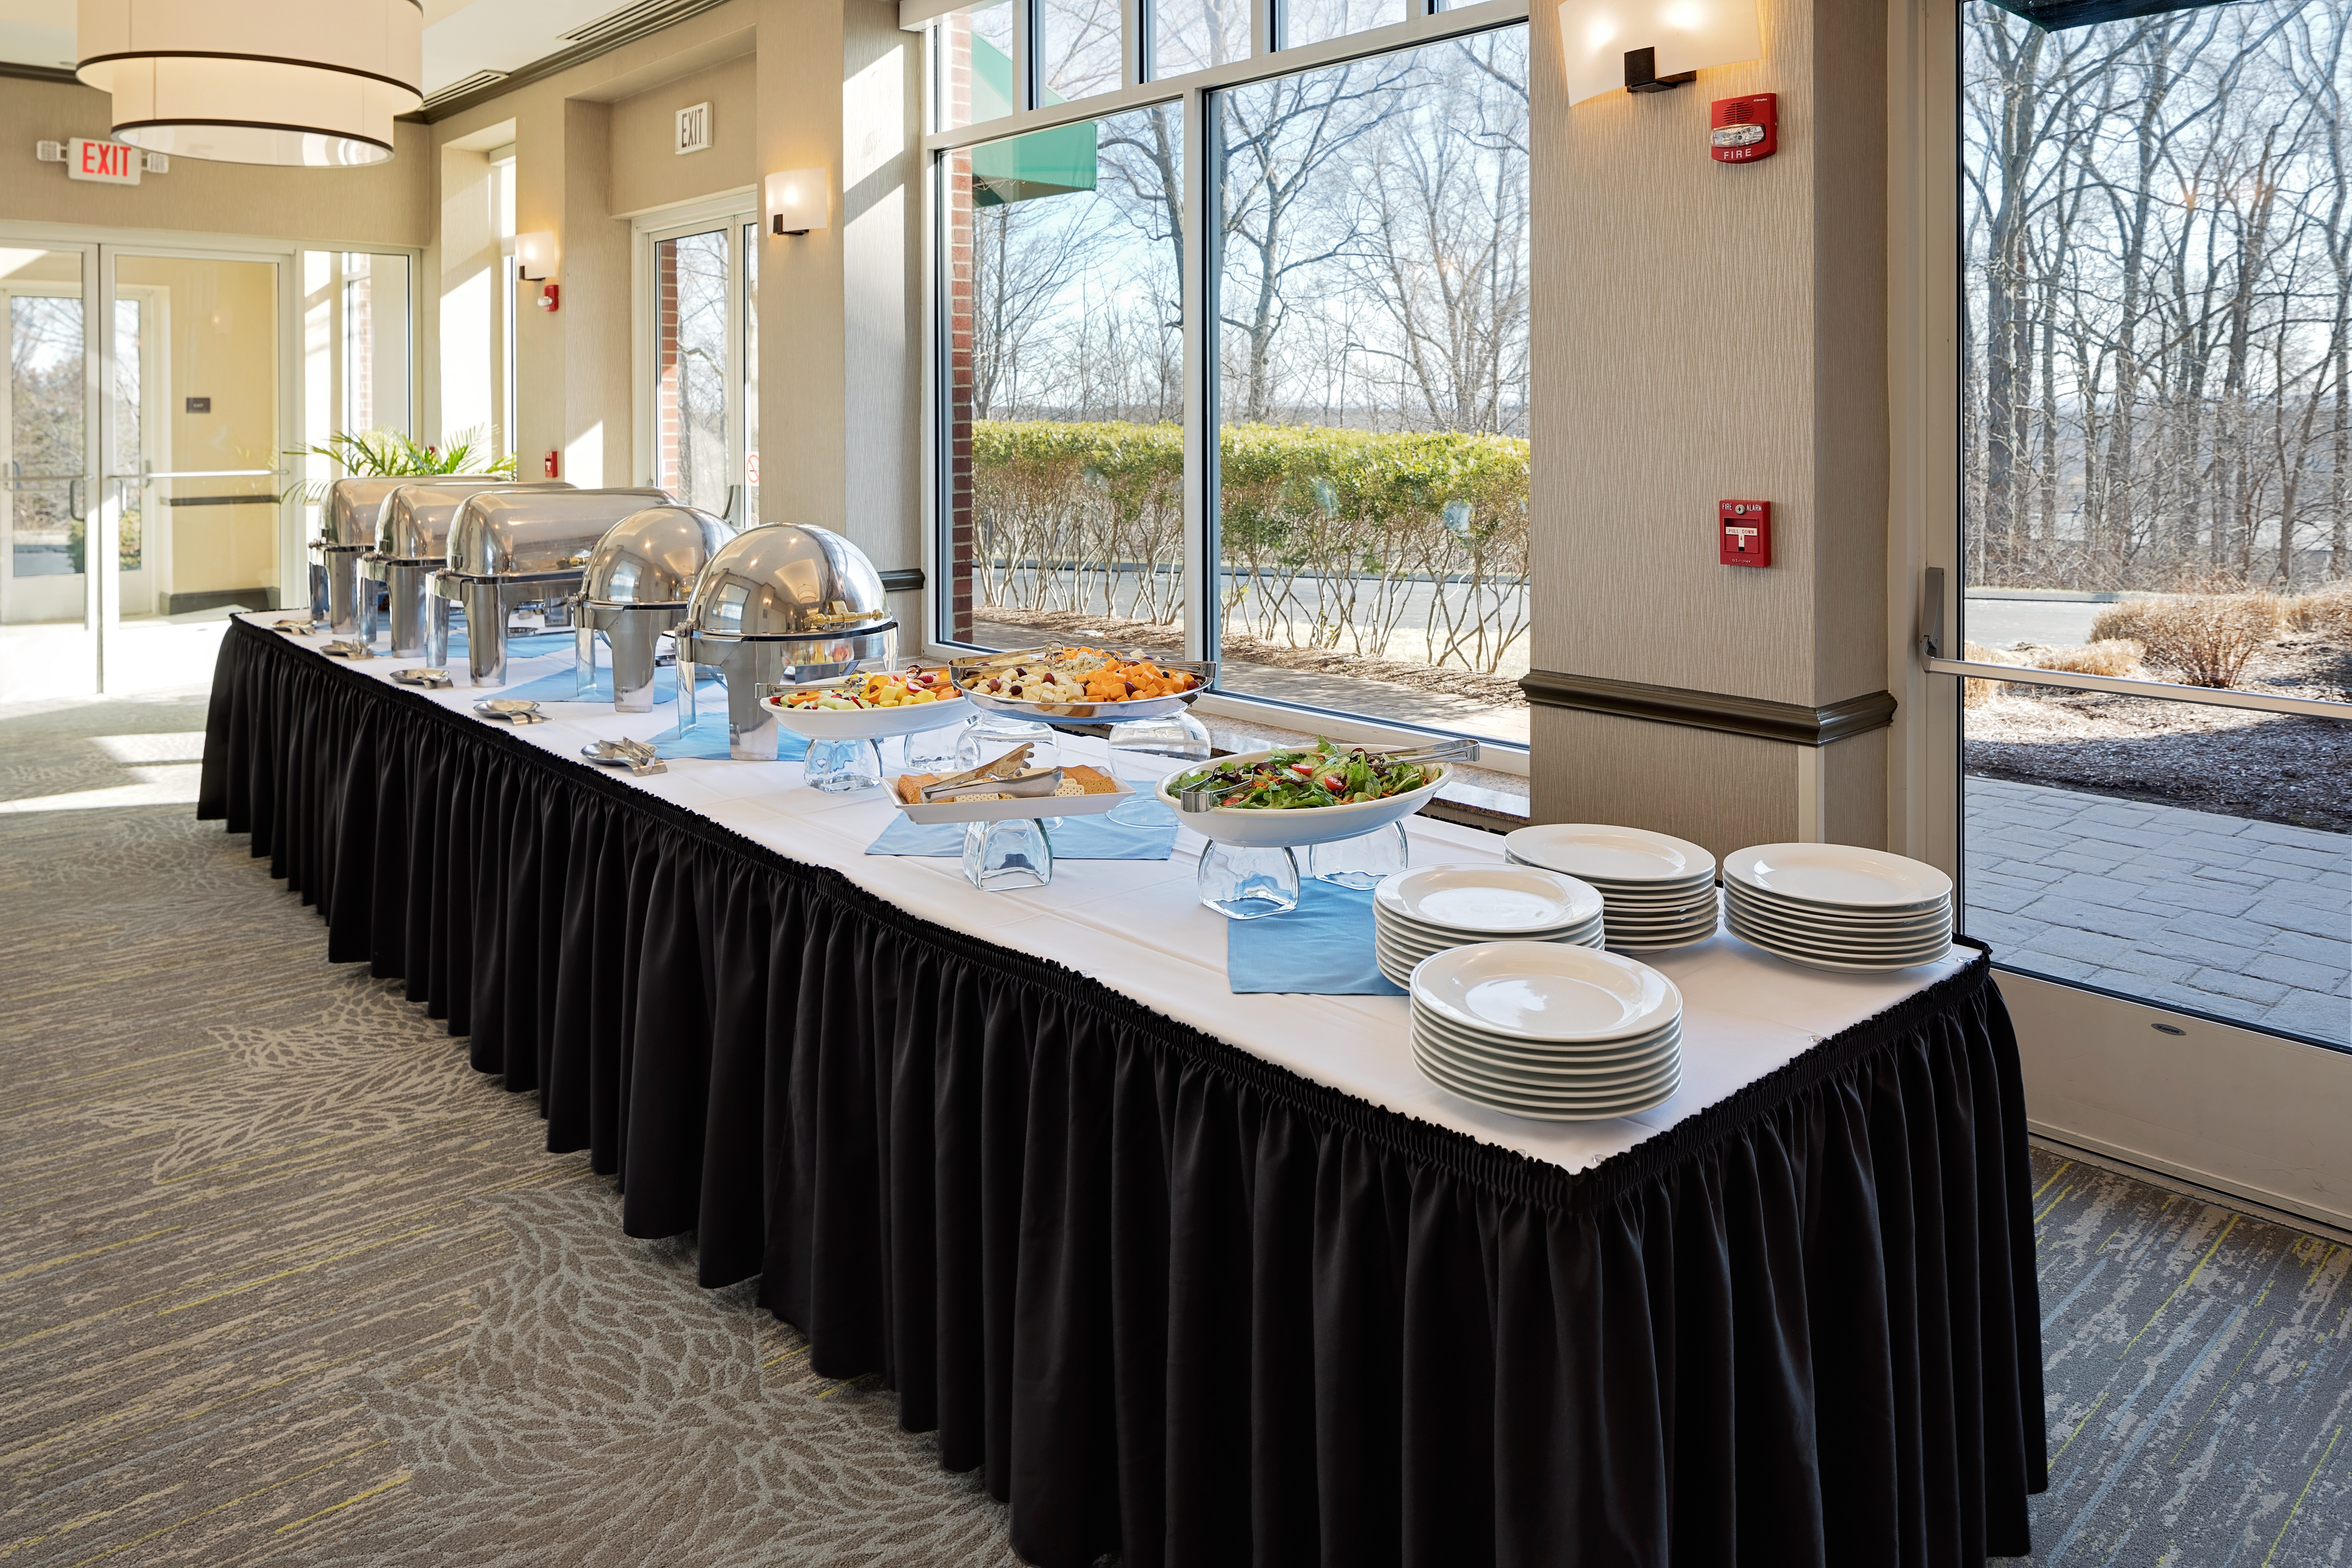 Buffet table with hot food, plates and salad as the spread. the table sits in front of large windows. 